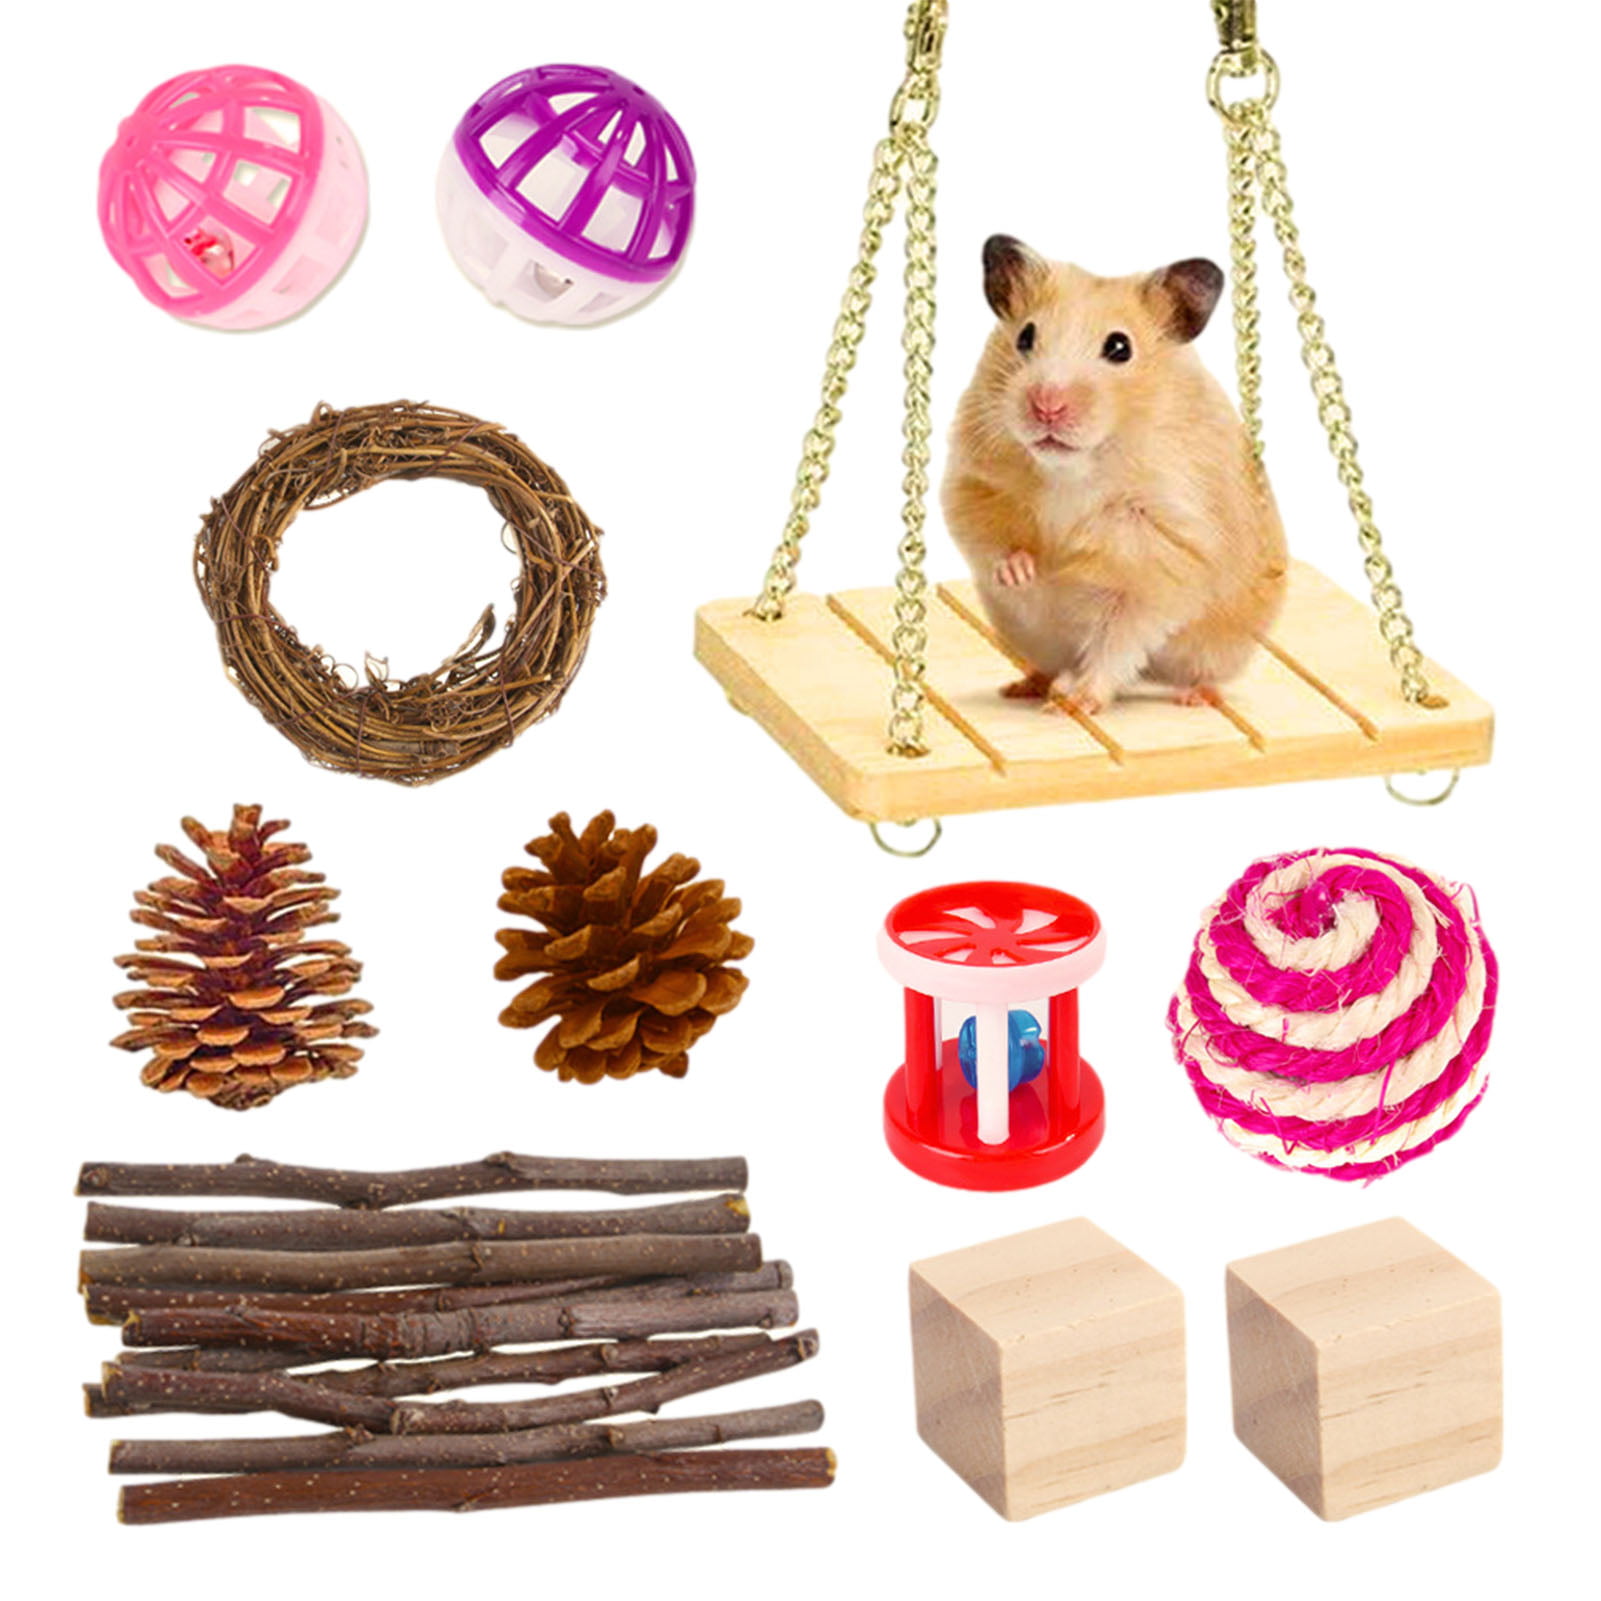 Wnakeli 1Set Hamster Chew Toys Natural Wooden Pine Guinea Pigs Rats Chinchillas Toys Accessories Dumbells Exercise Bell Roller Teeth Care Molar Toy for Birds Bunny Rabbits Gerbils